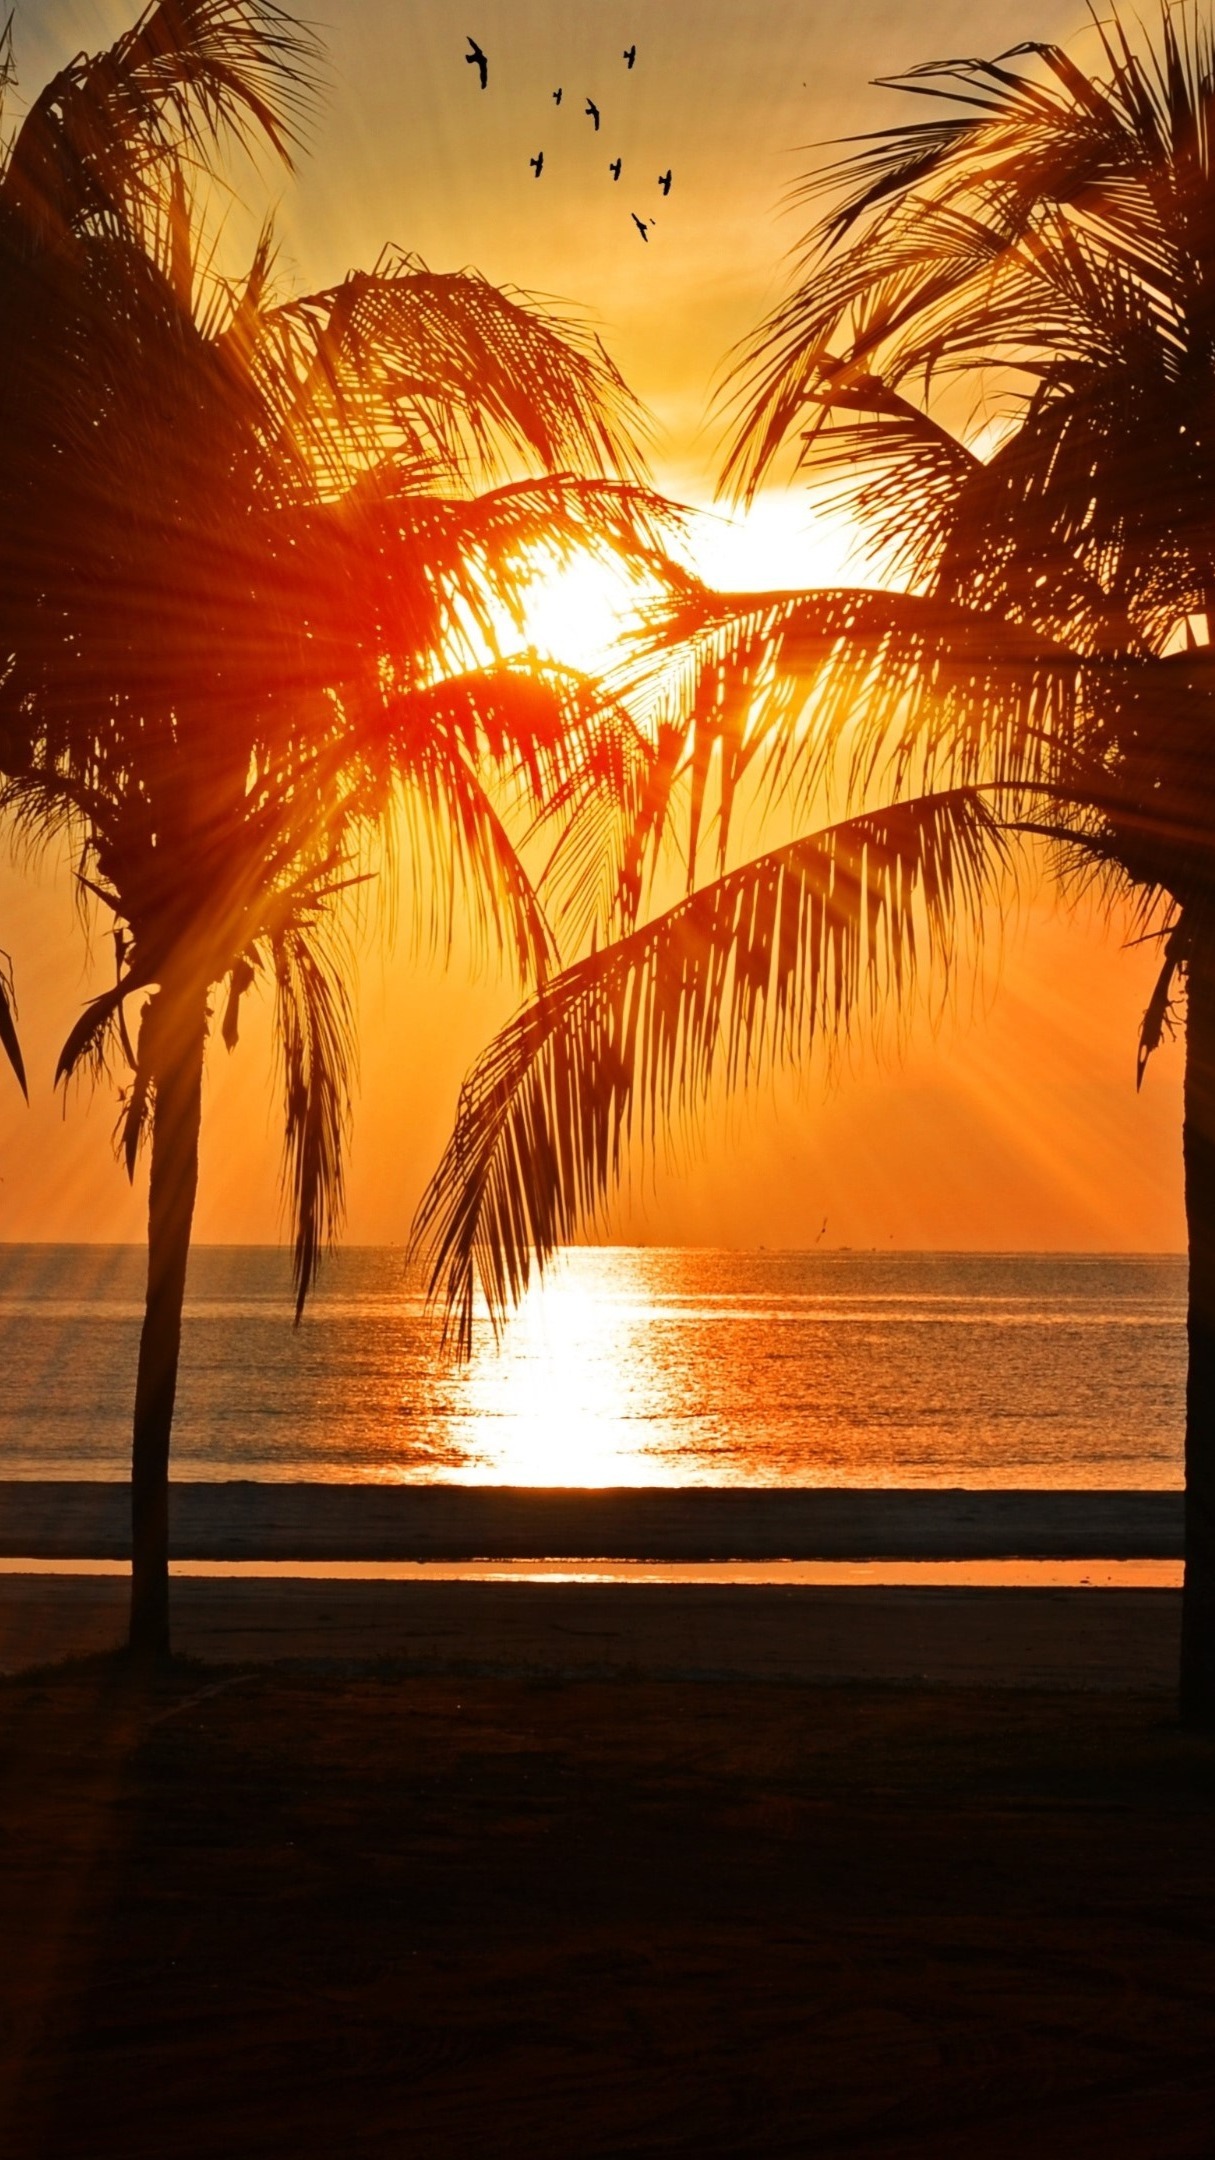 Silhouette Of Palm Trees During Golden Hour wallpaper - backiee